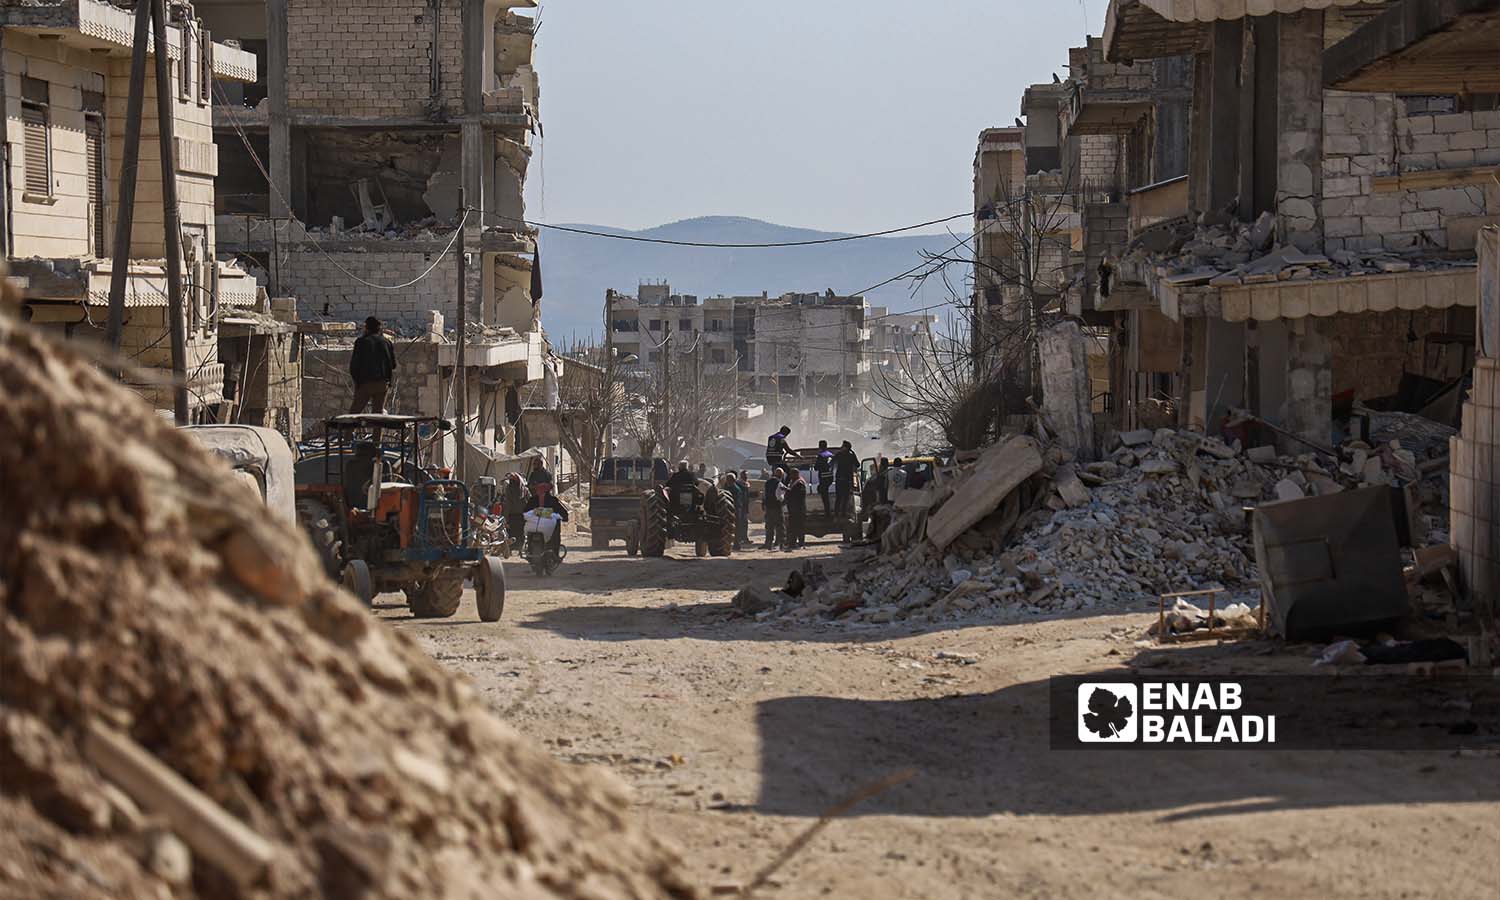 The streets of the city of Jindires in the countryside of Aleppo after the earthquake that hit northwest Syria - February 24, 2023 (Enab Baladi/Amir Kharboutli)